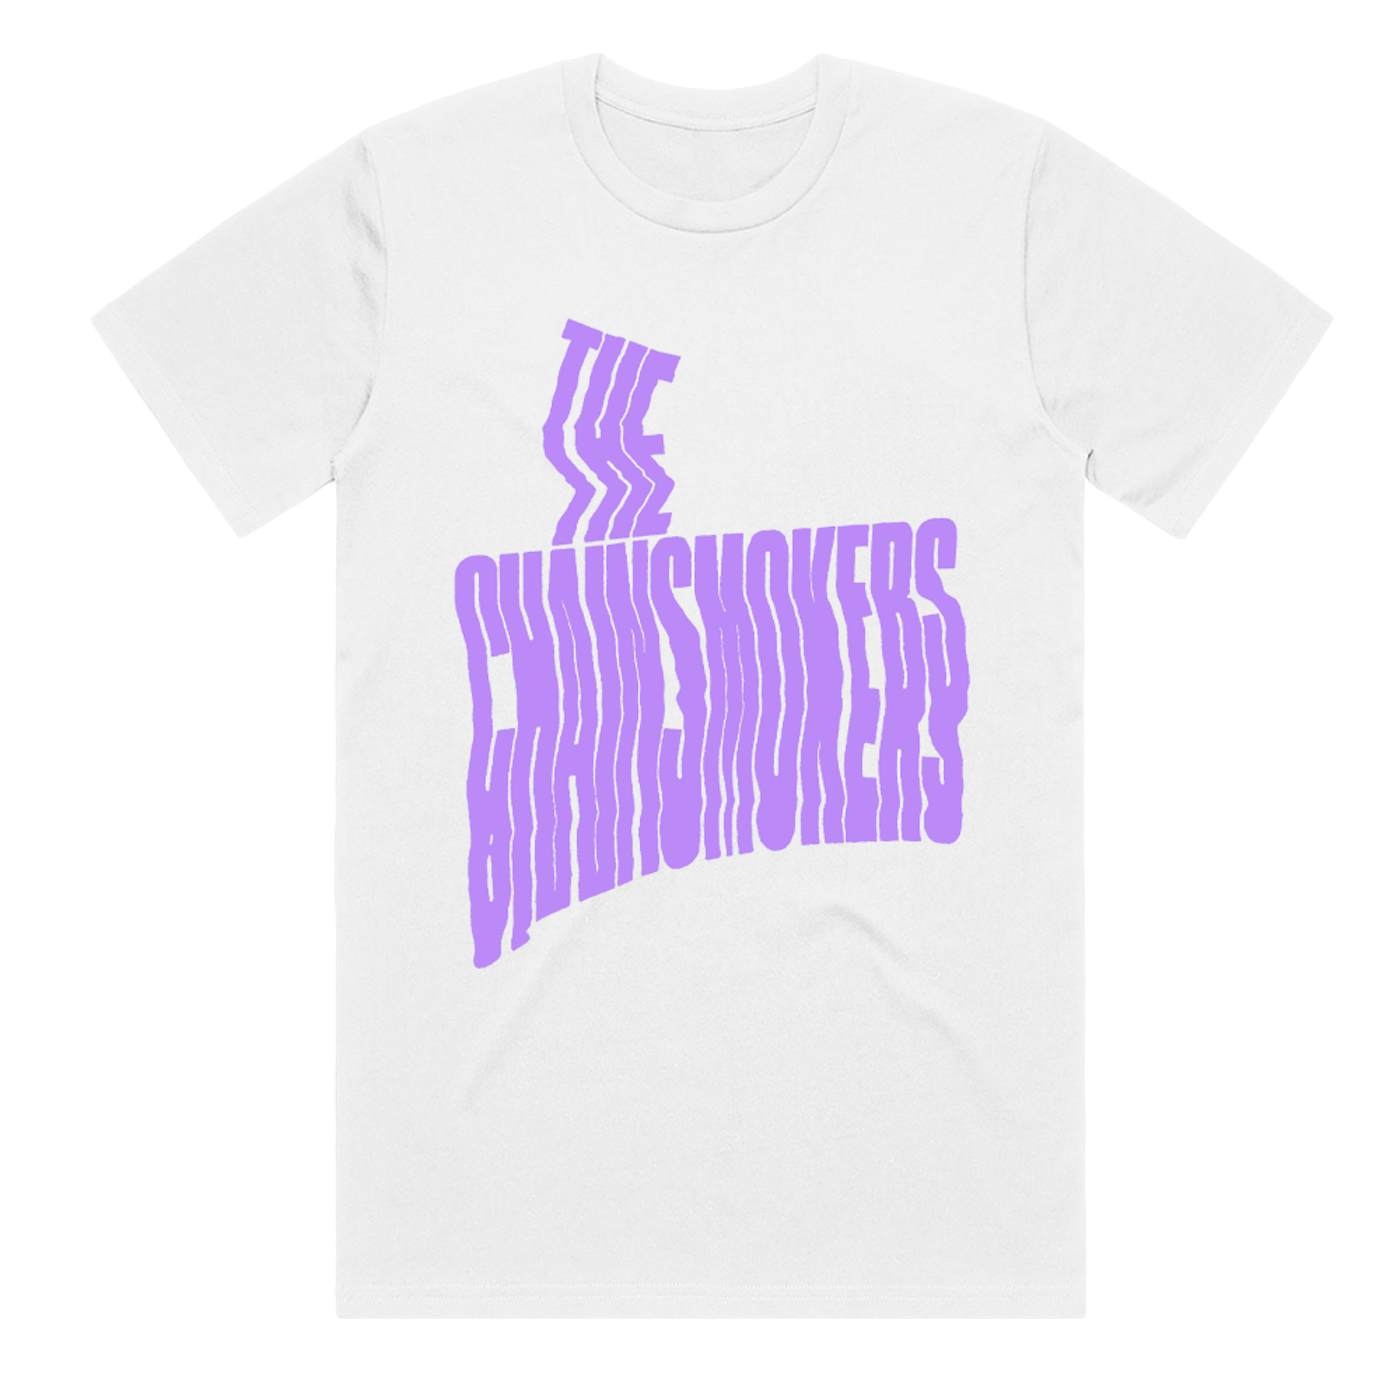 The Chainsmokers "So Far So Good" Distorted Tee